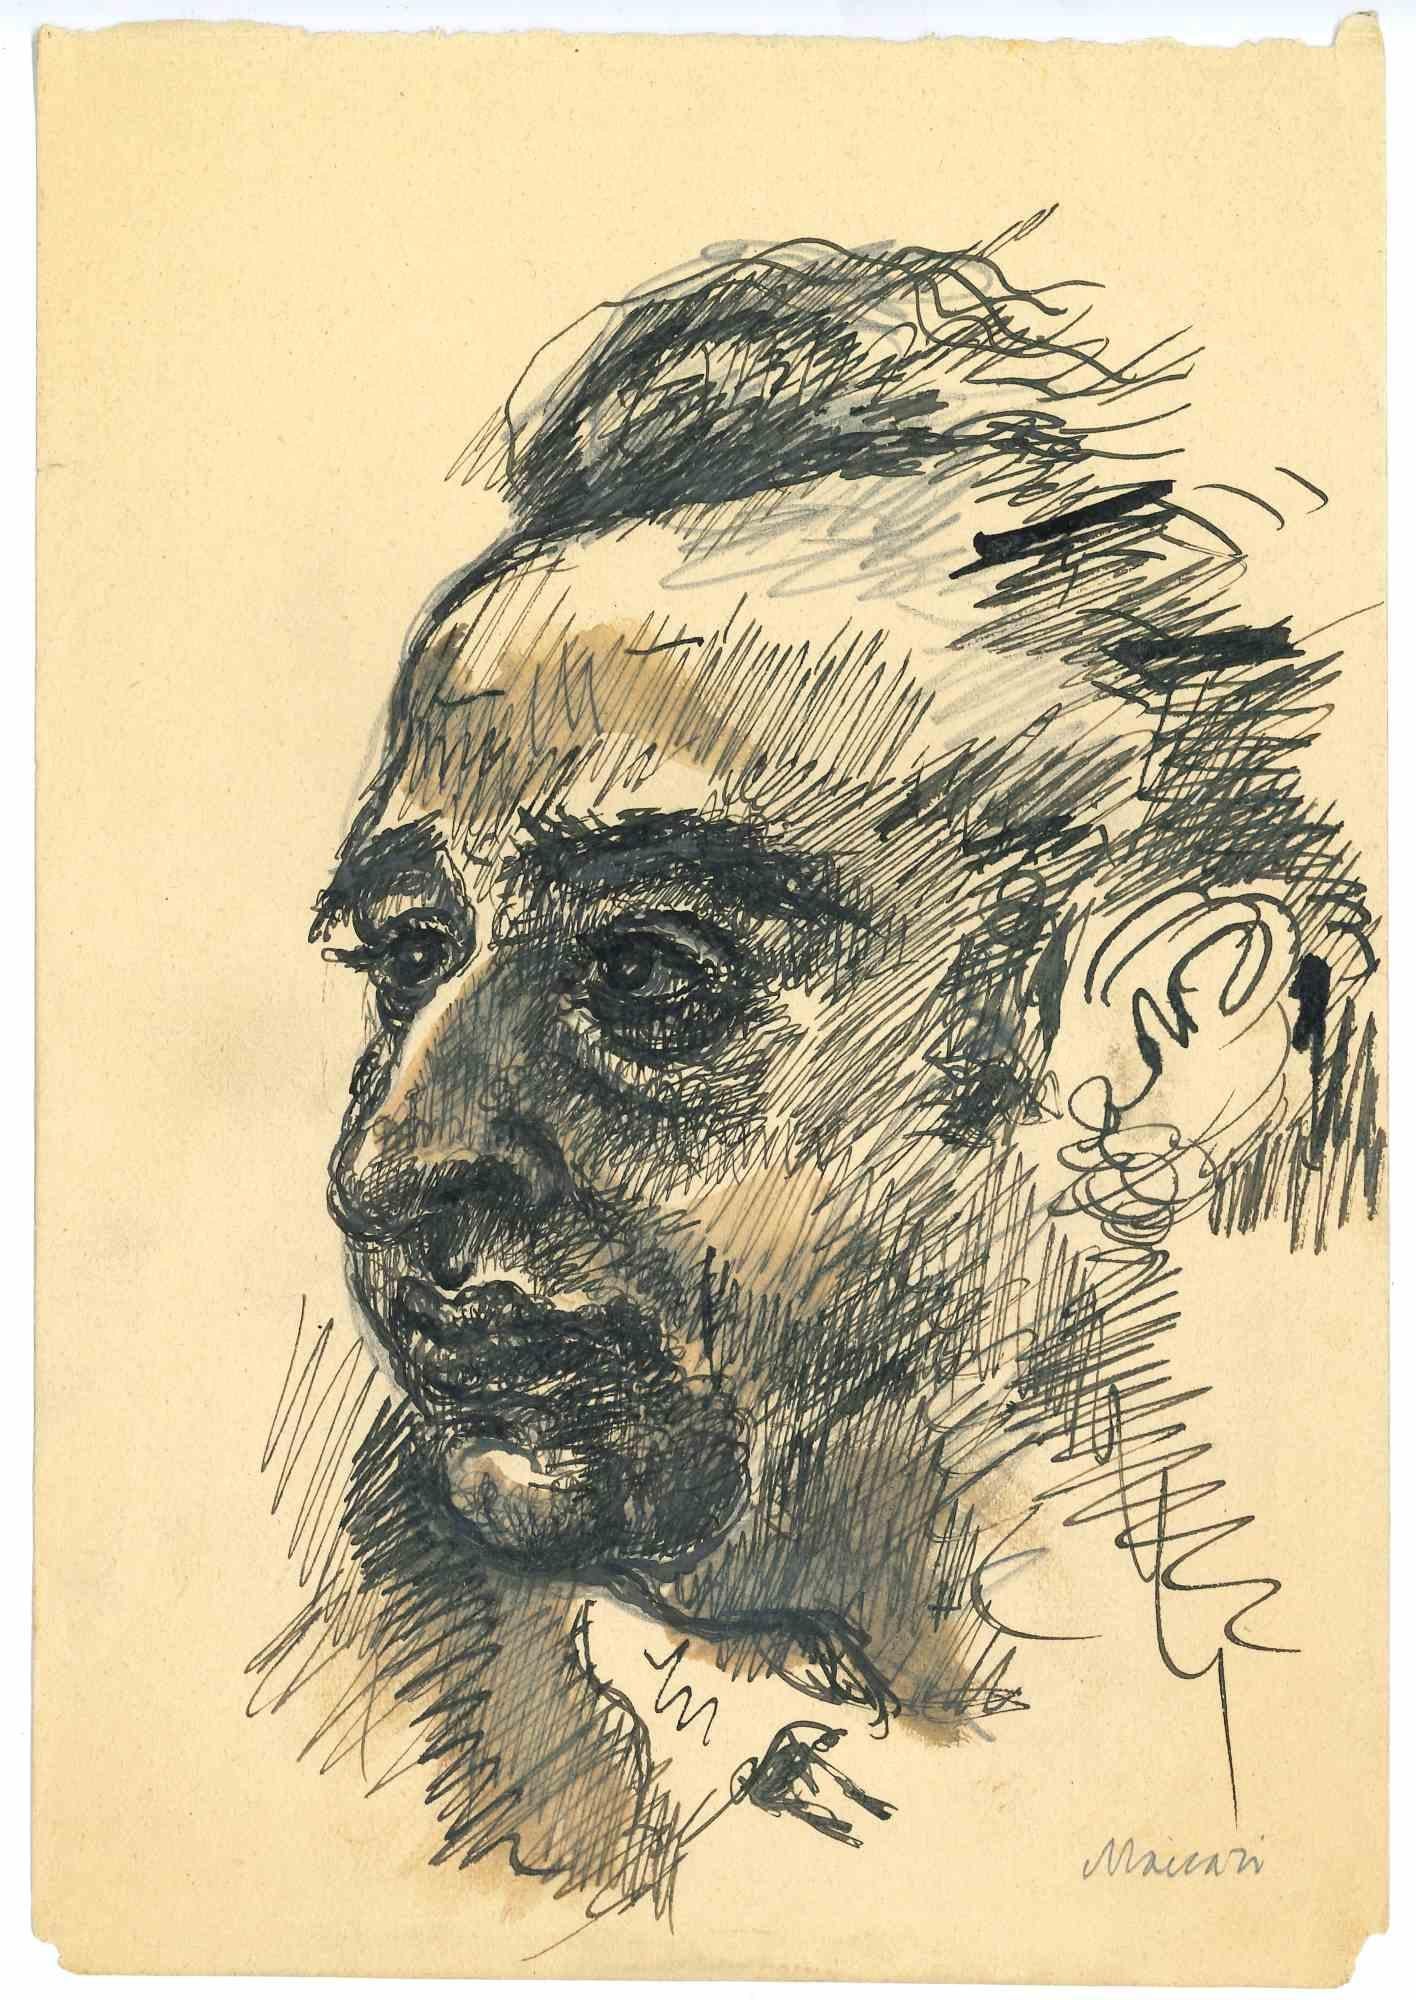 The Portrait is an original Drawing in pen and ink on creamy-colored paper realized by Mino Maccari in mid 20th century.

Hand-signed on the lower in pencil.

Good conditions.

Mino Maccari (1898-1989) was an Italian writer, painter, engraver and